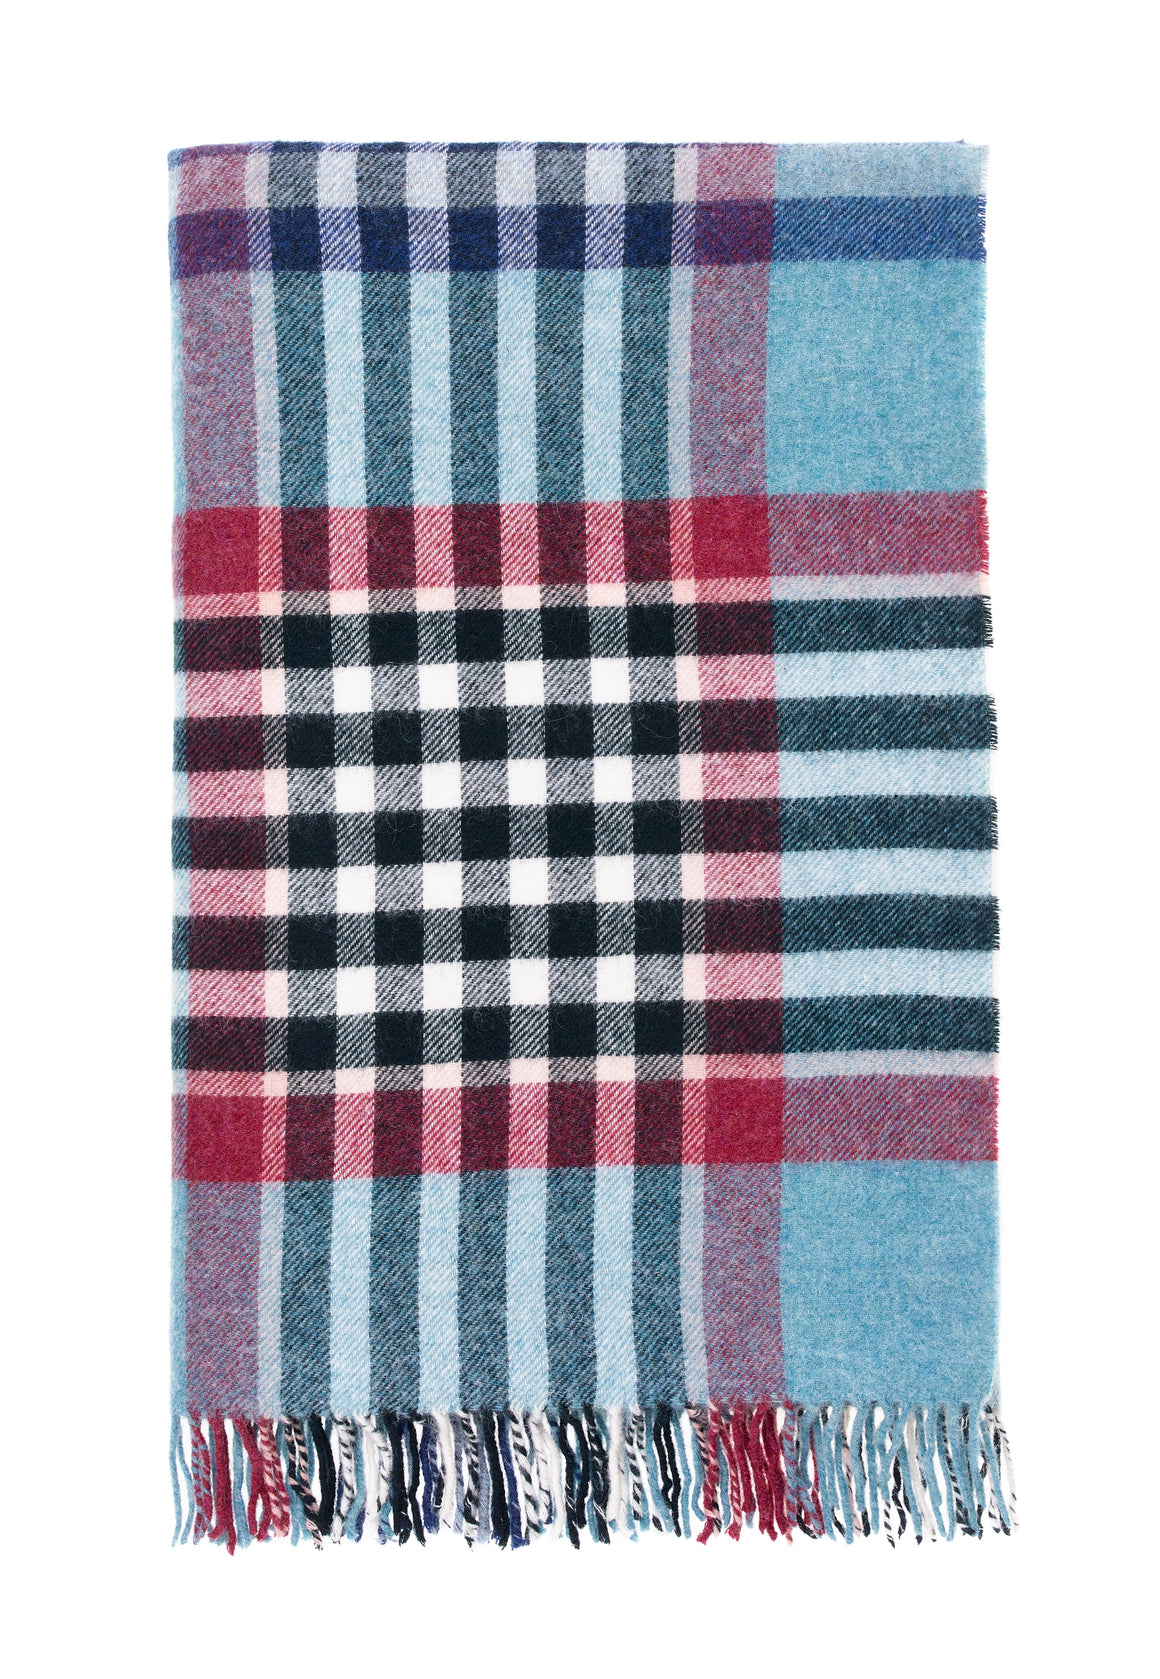 Shetland Pure New Wool - Chesil Teal - Throw Blanket - Bronte by Moon